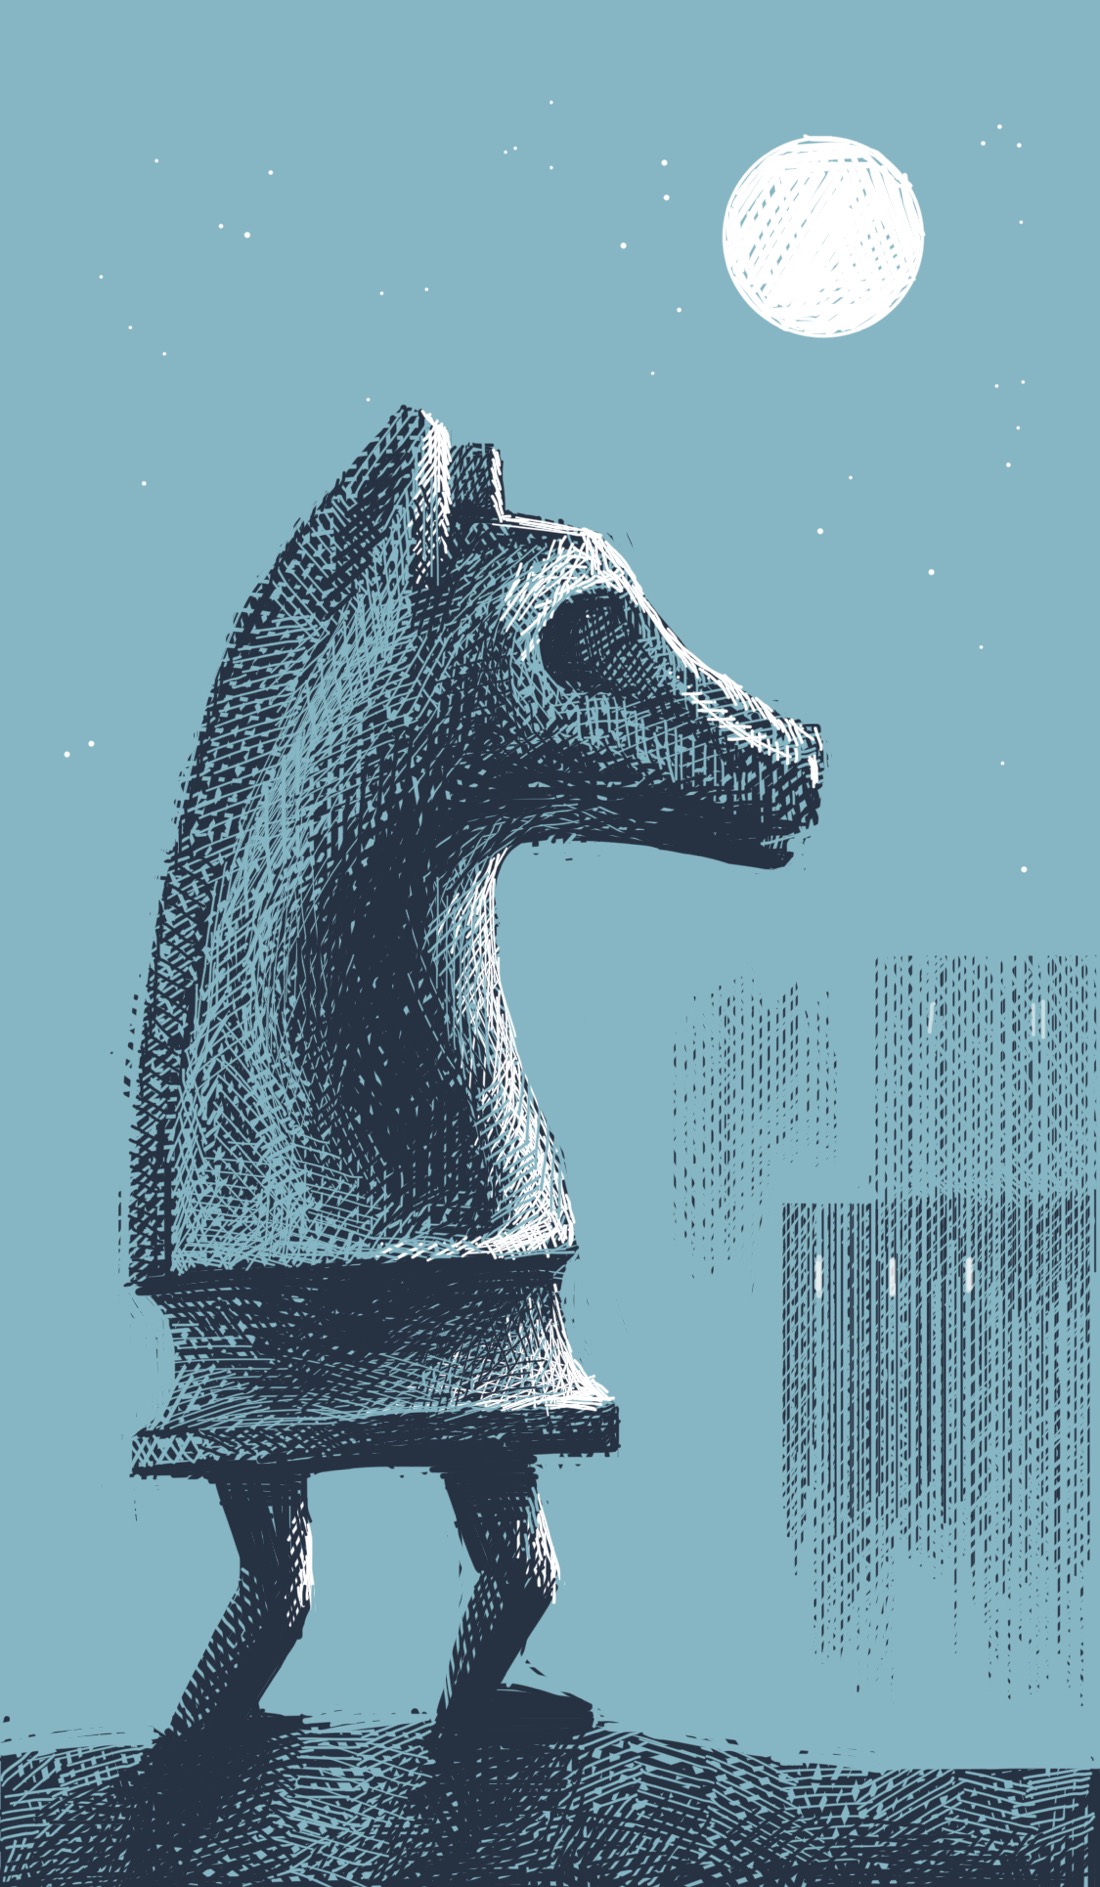 A large chess knight with legs walks along the ground under a full moon, a fortress dimly visible in the distance